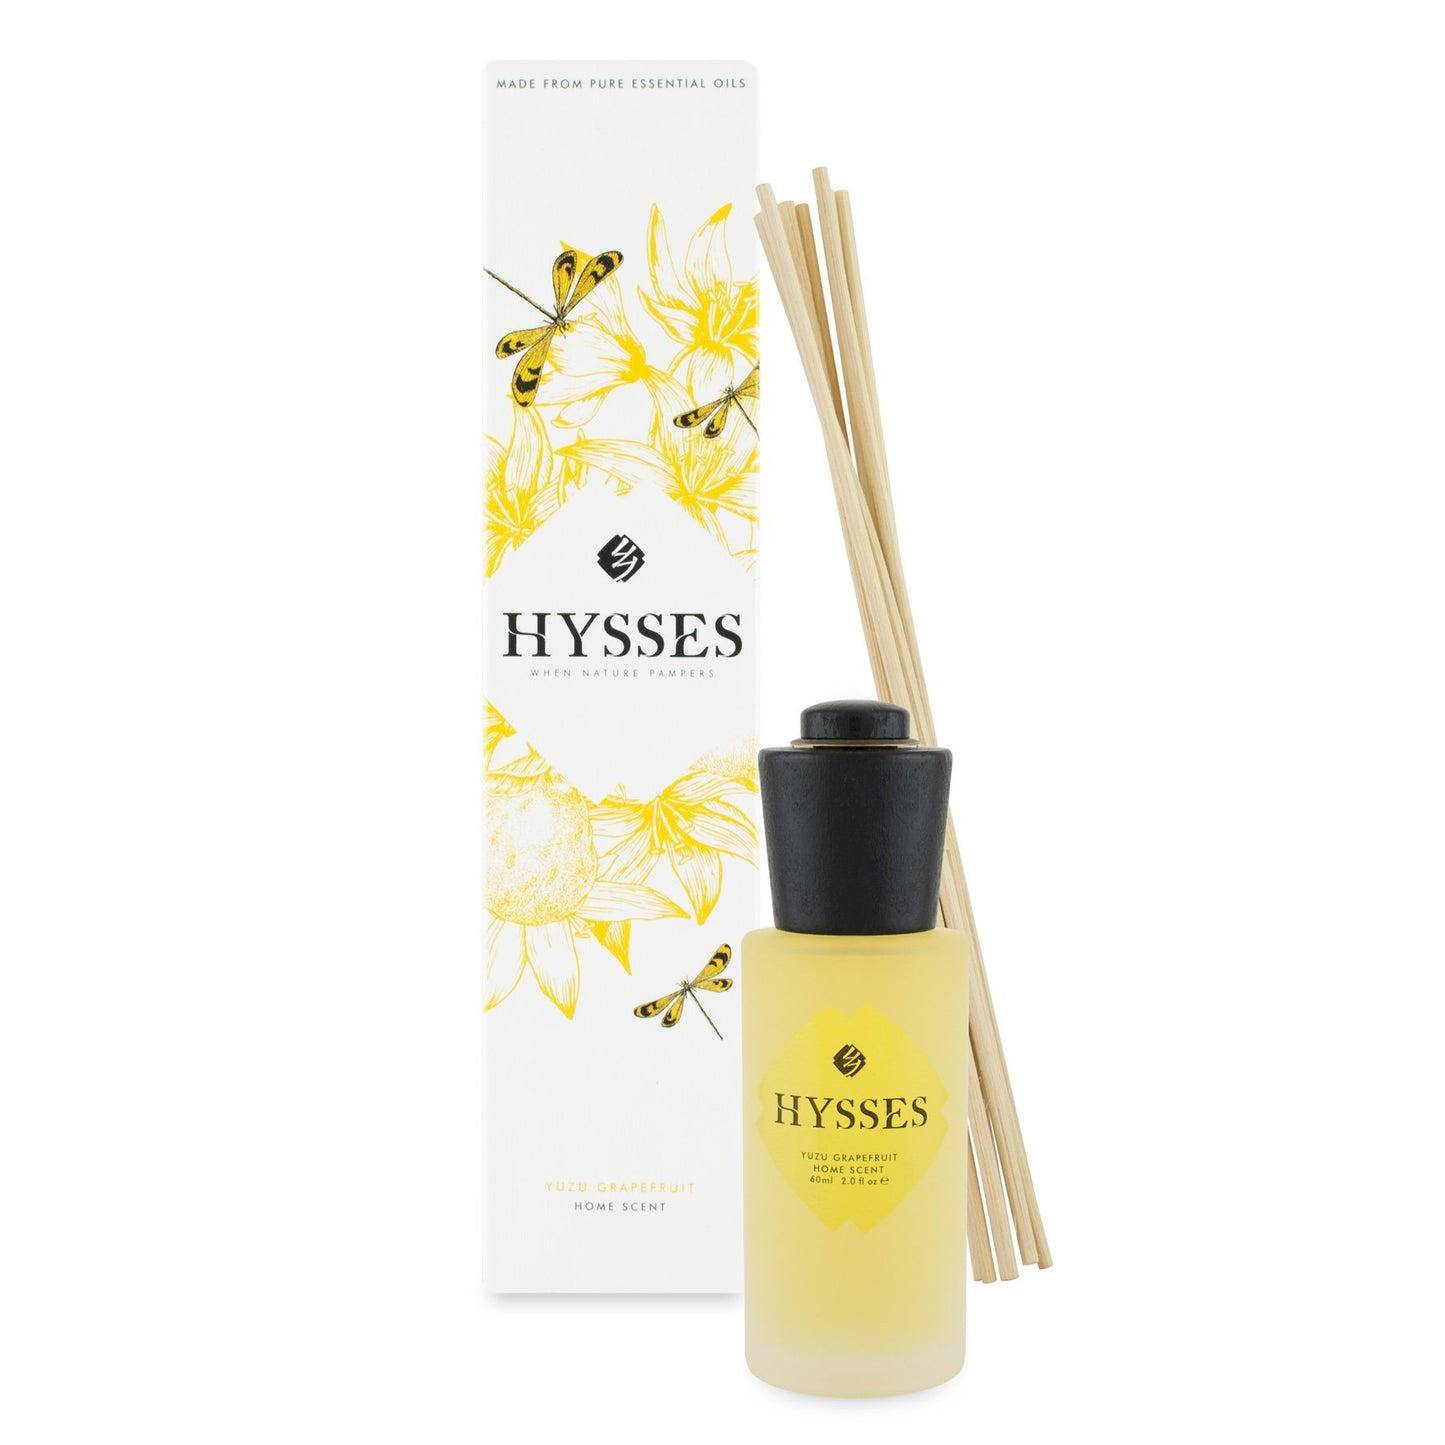 Hysses Home Scent Reed Diffuser - Yuzu Grapefruit